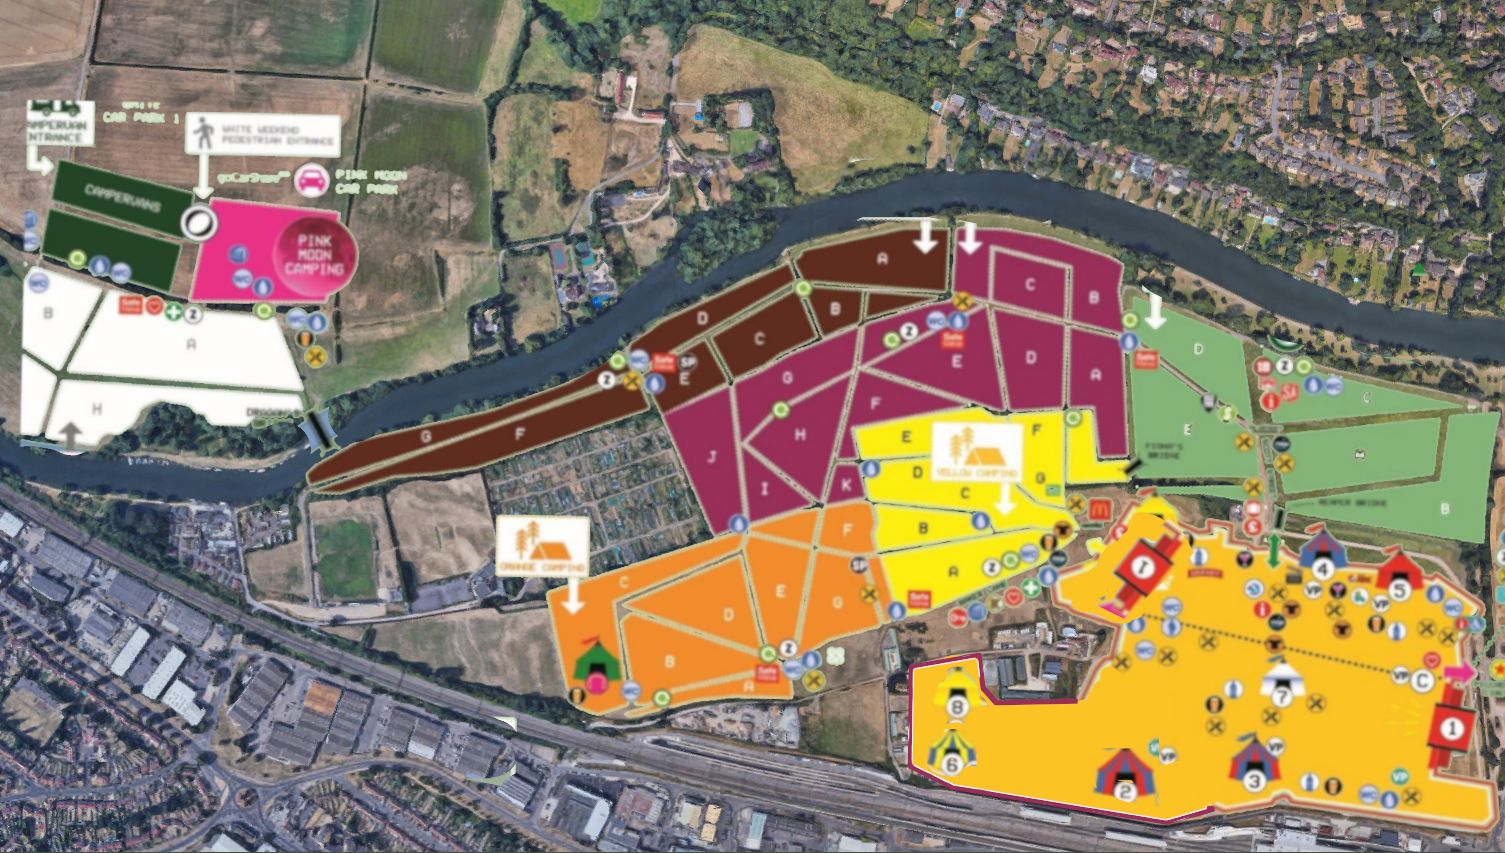 New arena layout with two main stages - Reading - Reading & Leeds Festivals  - Festival Forums